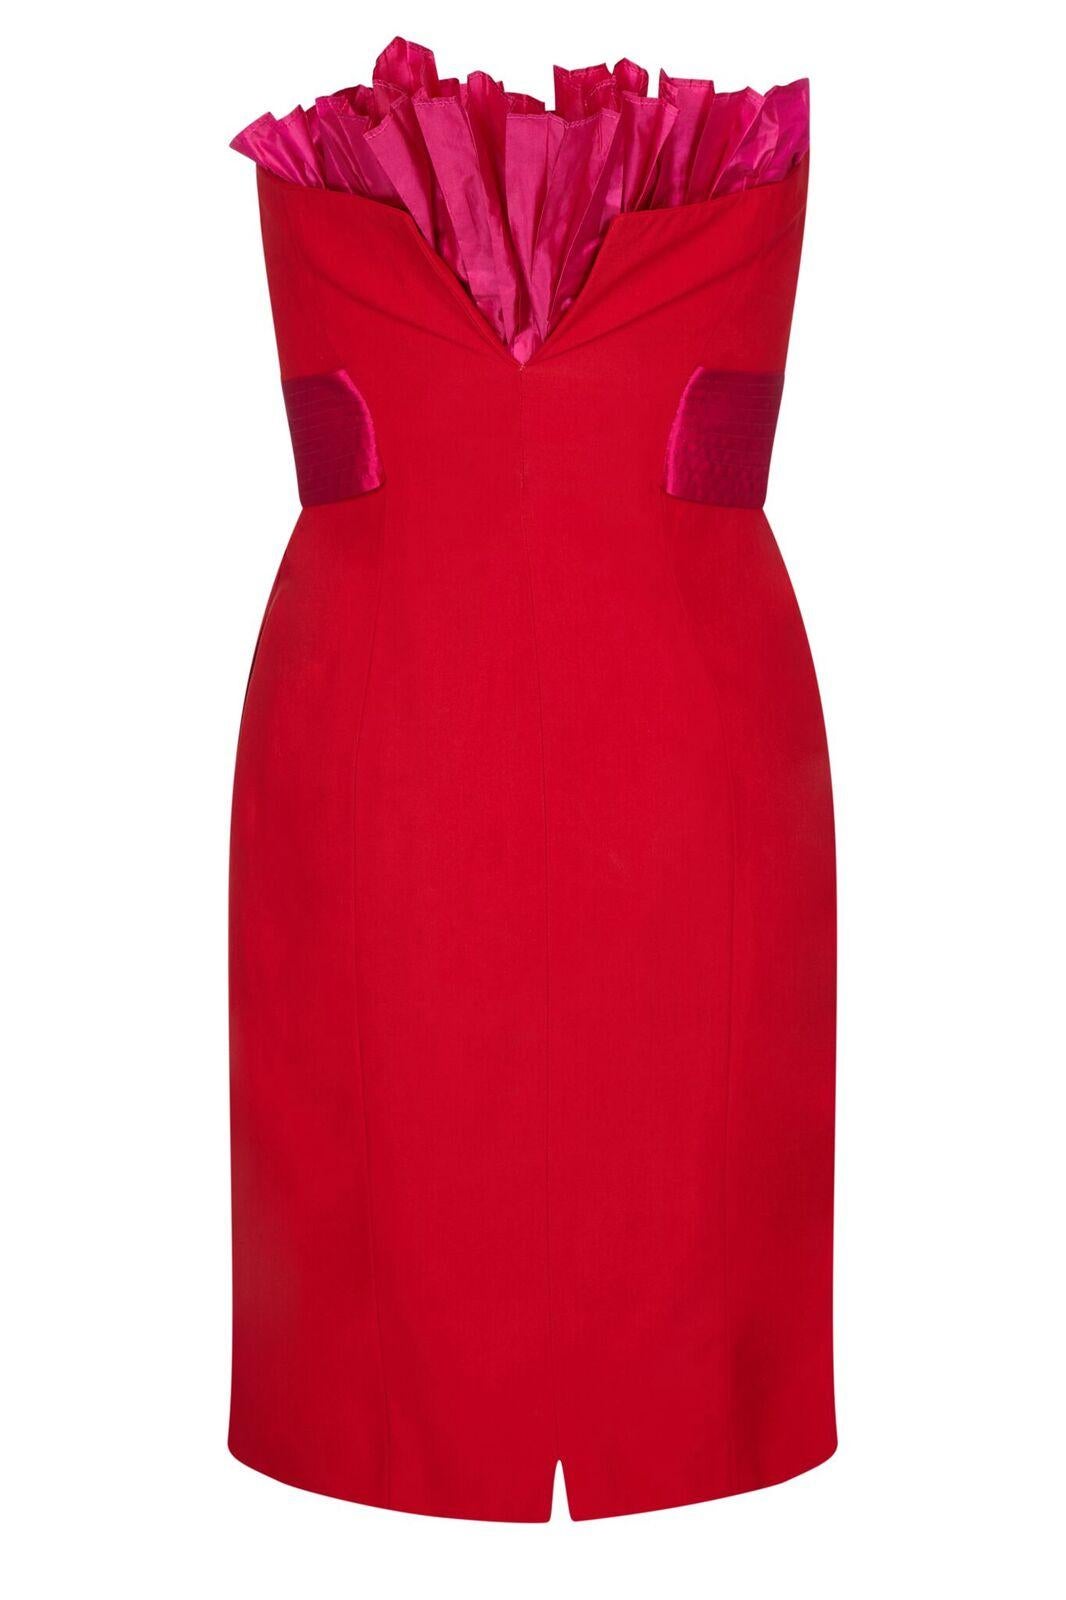 This arresting 1980s crimson silk cocktail dress by Gianfranco Ferre is of excellent quality and features a show-stopping design. The piece combines stylish simplicity with flamboyant, innovative tailoring. At first glance we see a knee length